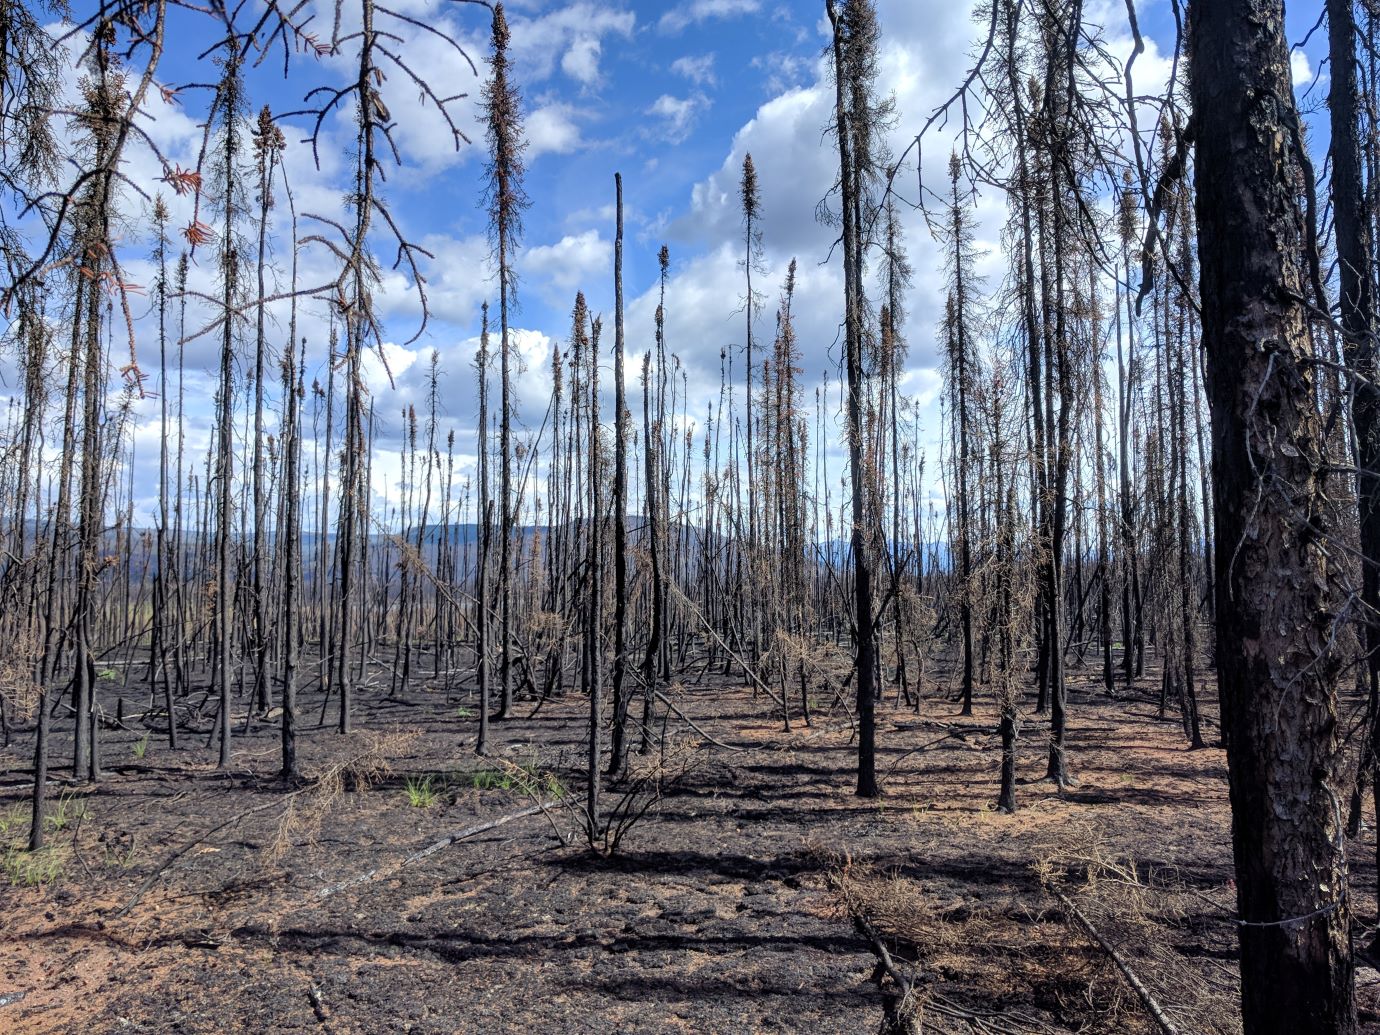 A forest of burned boreal forest trees, all blackened and without pine needles, a year after a forest fire went through the Victoria Gold access road area near Mayo, Yukon. A few small green plants are visible on a forest floor that is otherwise barren. Hills and a clear blue sky are visible behind the burned forest.